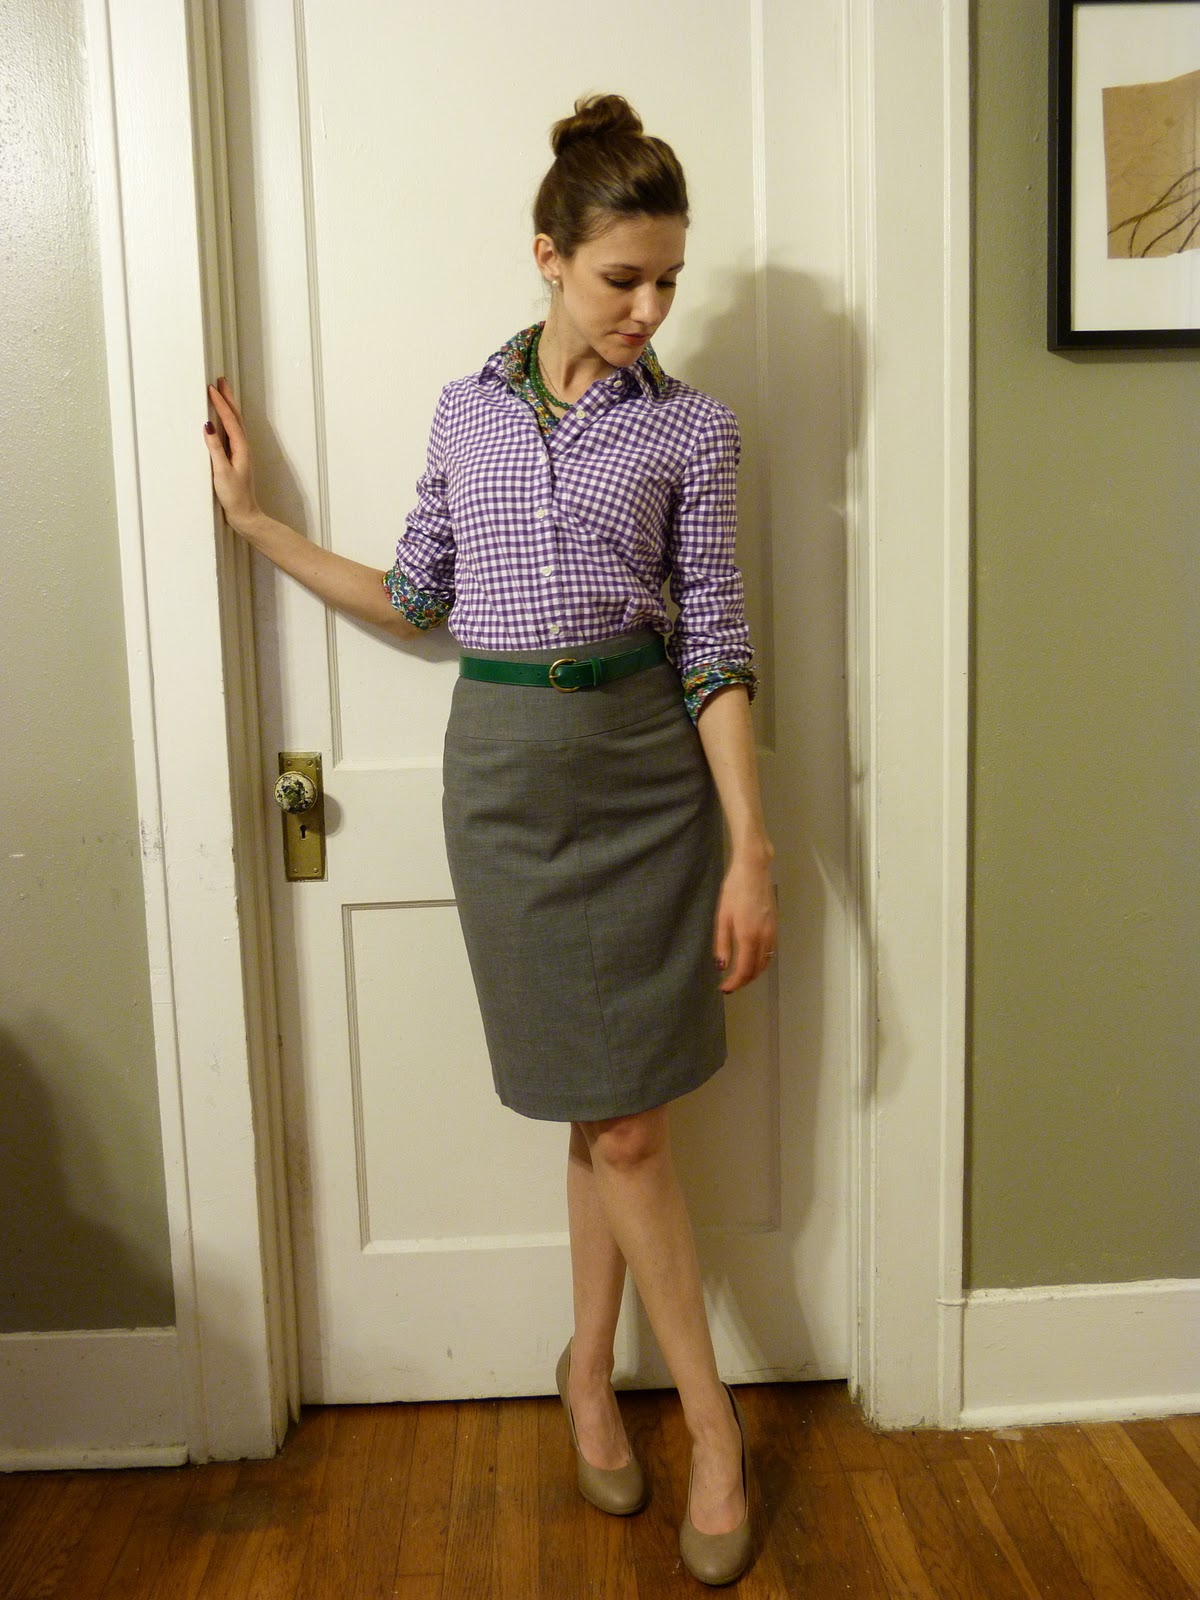 The Perpetual Student's Wife: Layered Blouses